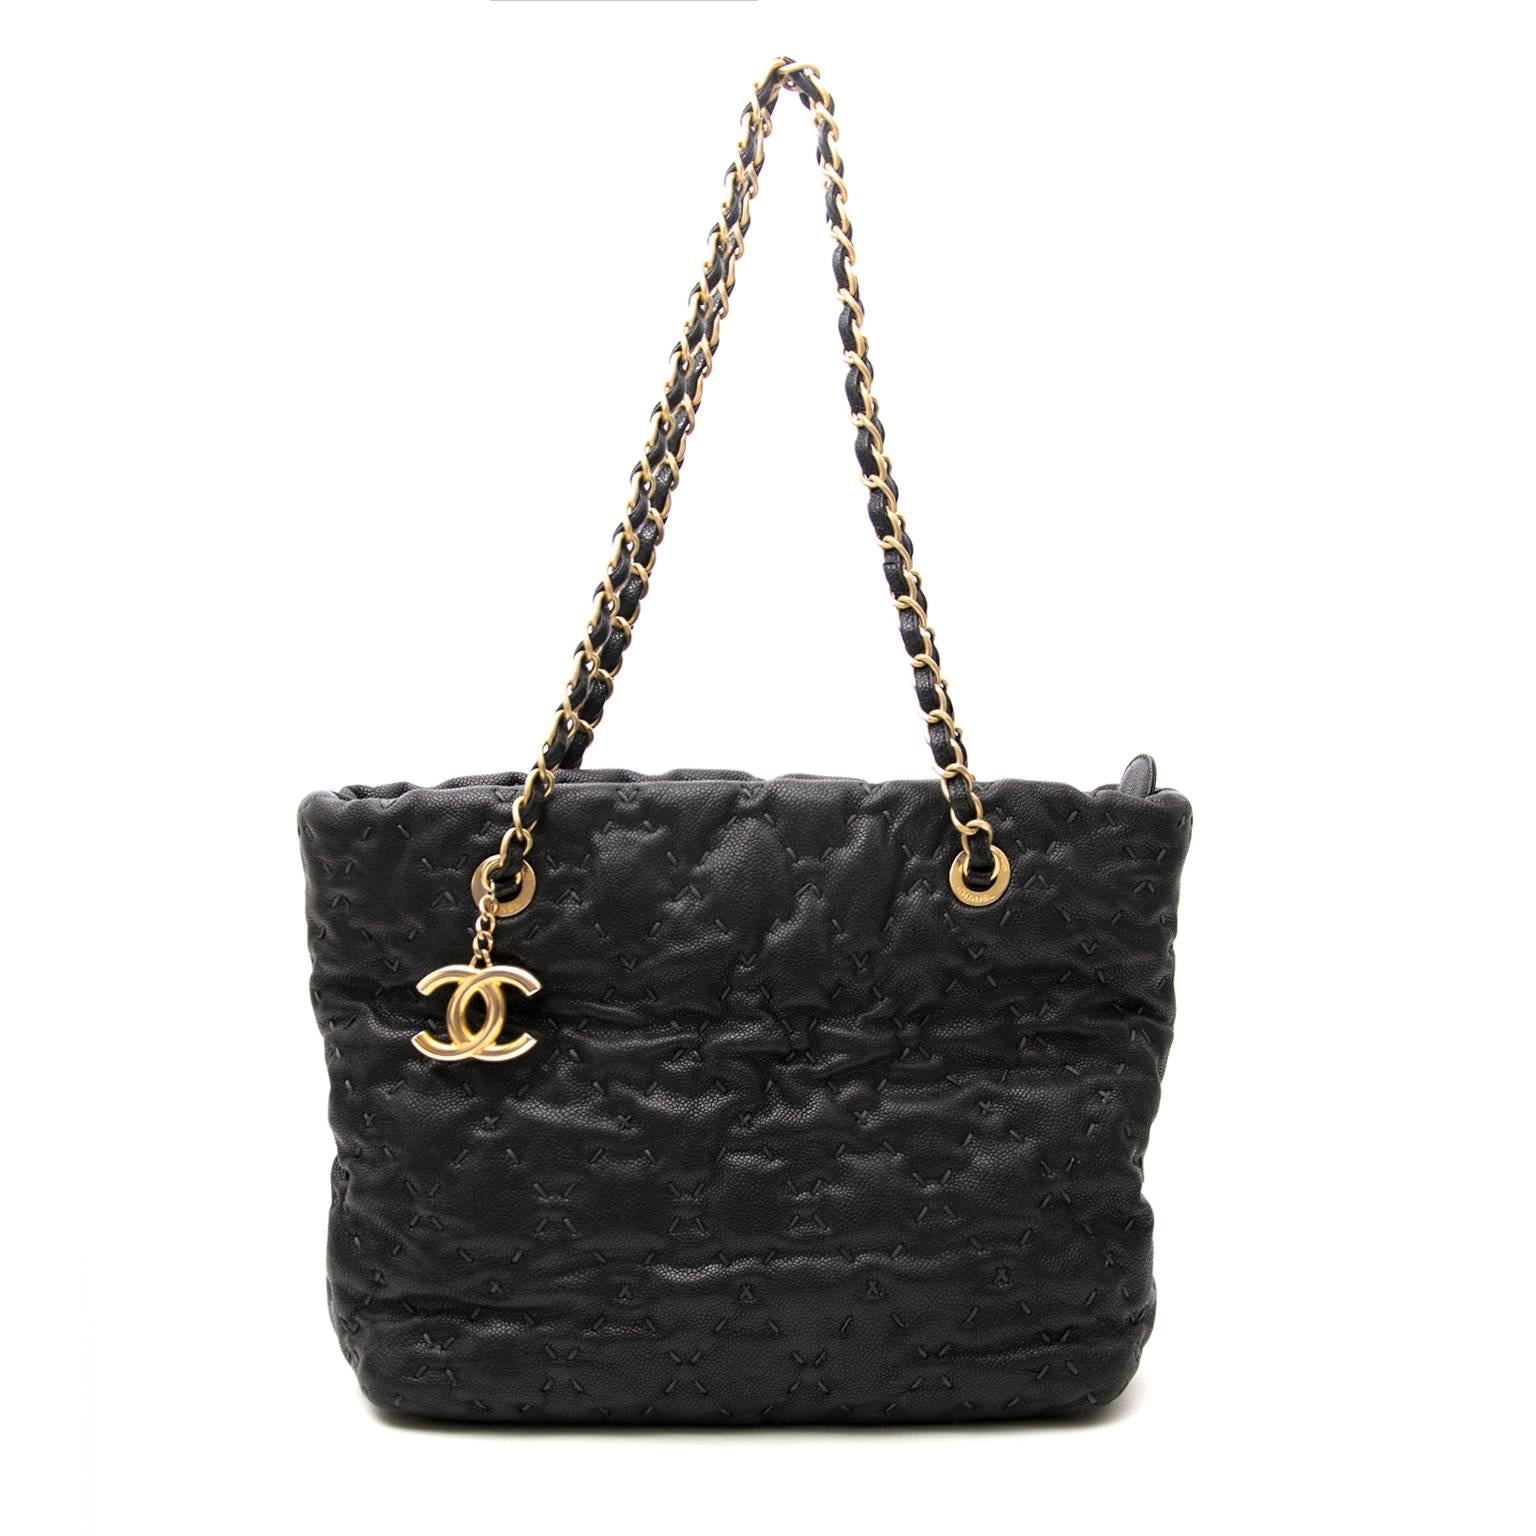 Very Good Condition

Estimated retail price: €3200

Chanel Black Stitched Shoulder Bag

This beautiful black leather Chanel Shoulder Bag is the perfect day to night bag.The bag closes with a zipper on top and features a CC logo hang tag in aged gold